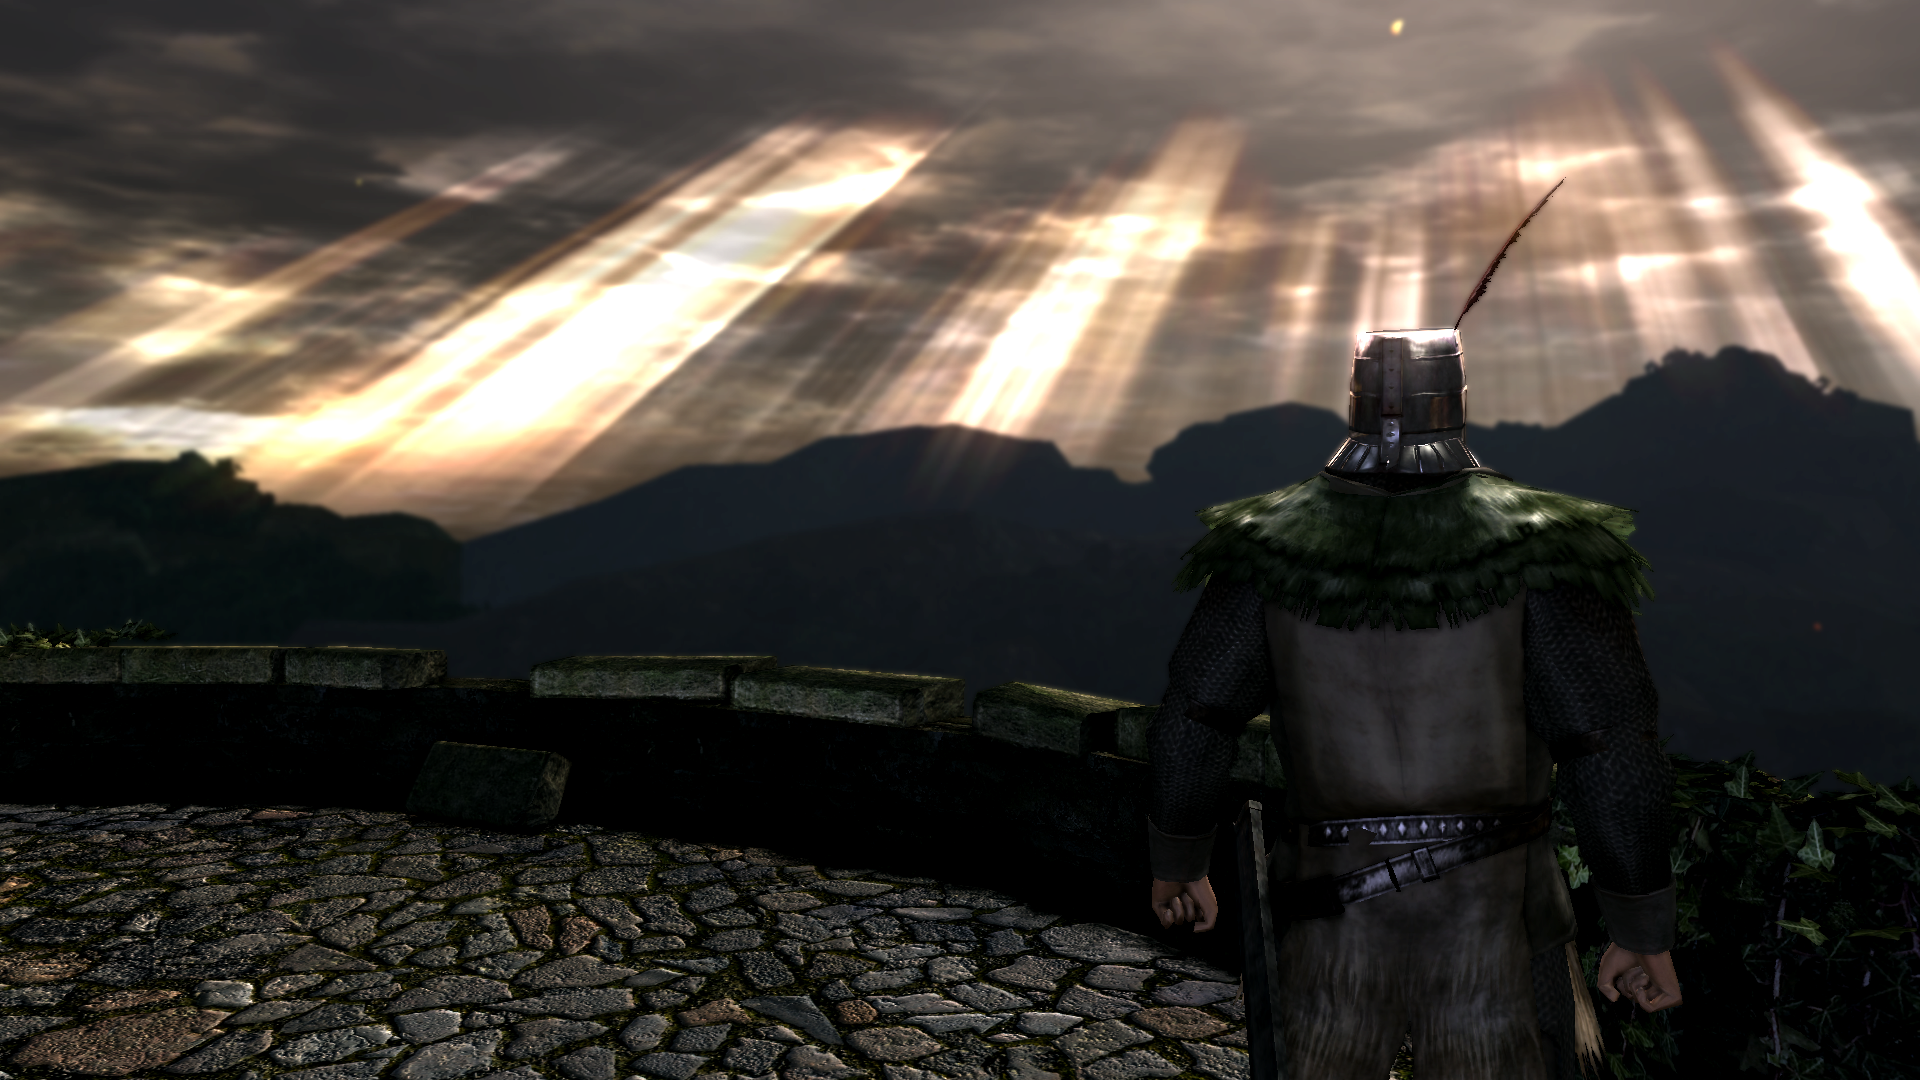 Solaire Full HD wallpapers. 